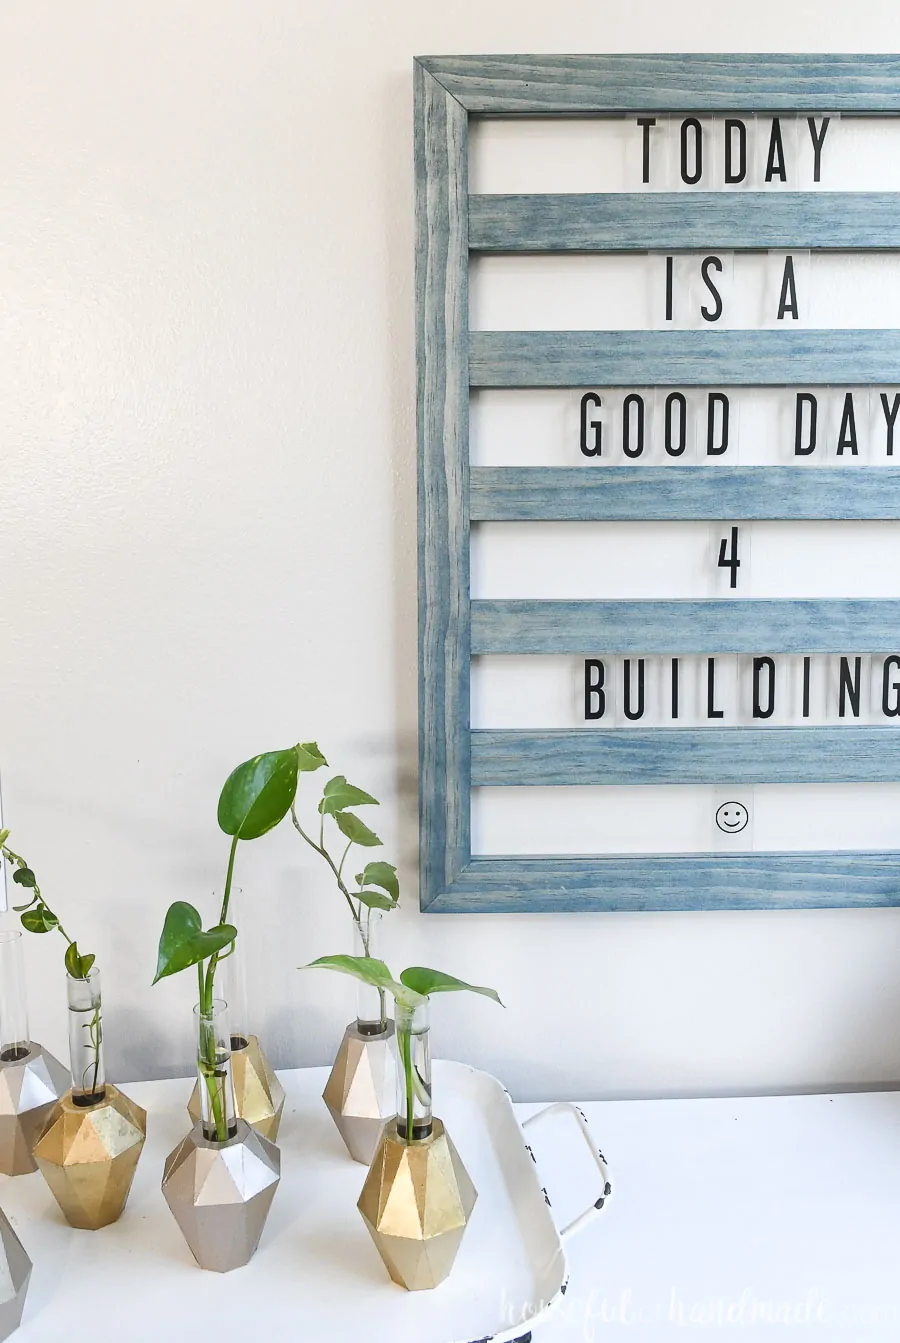 Close up of the sliding letter board with the words "Today is a good day 4 building" showing on it. 